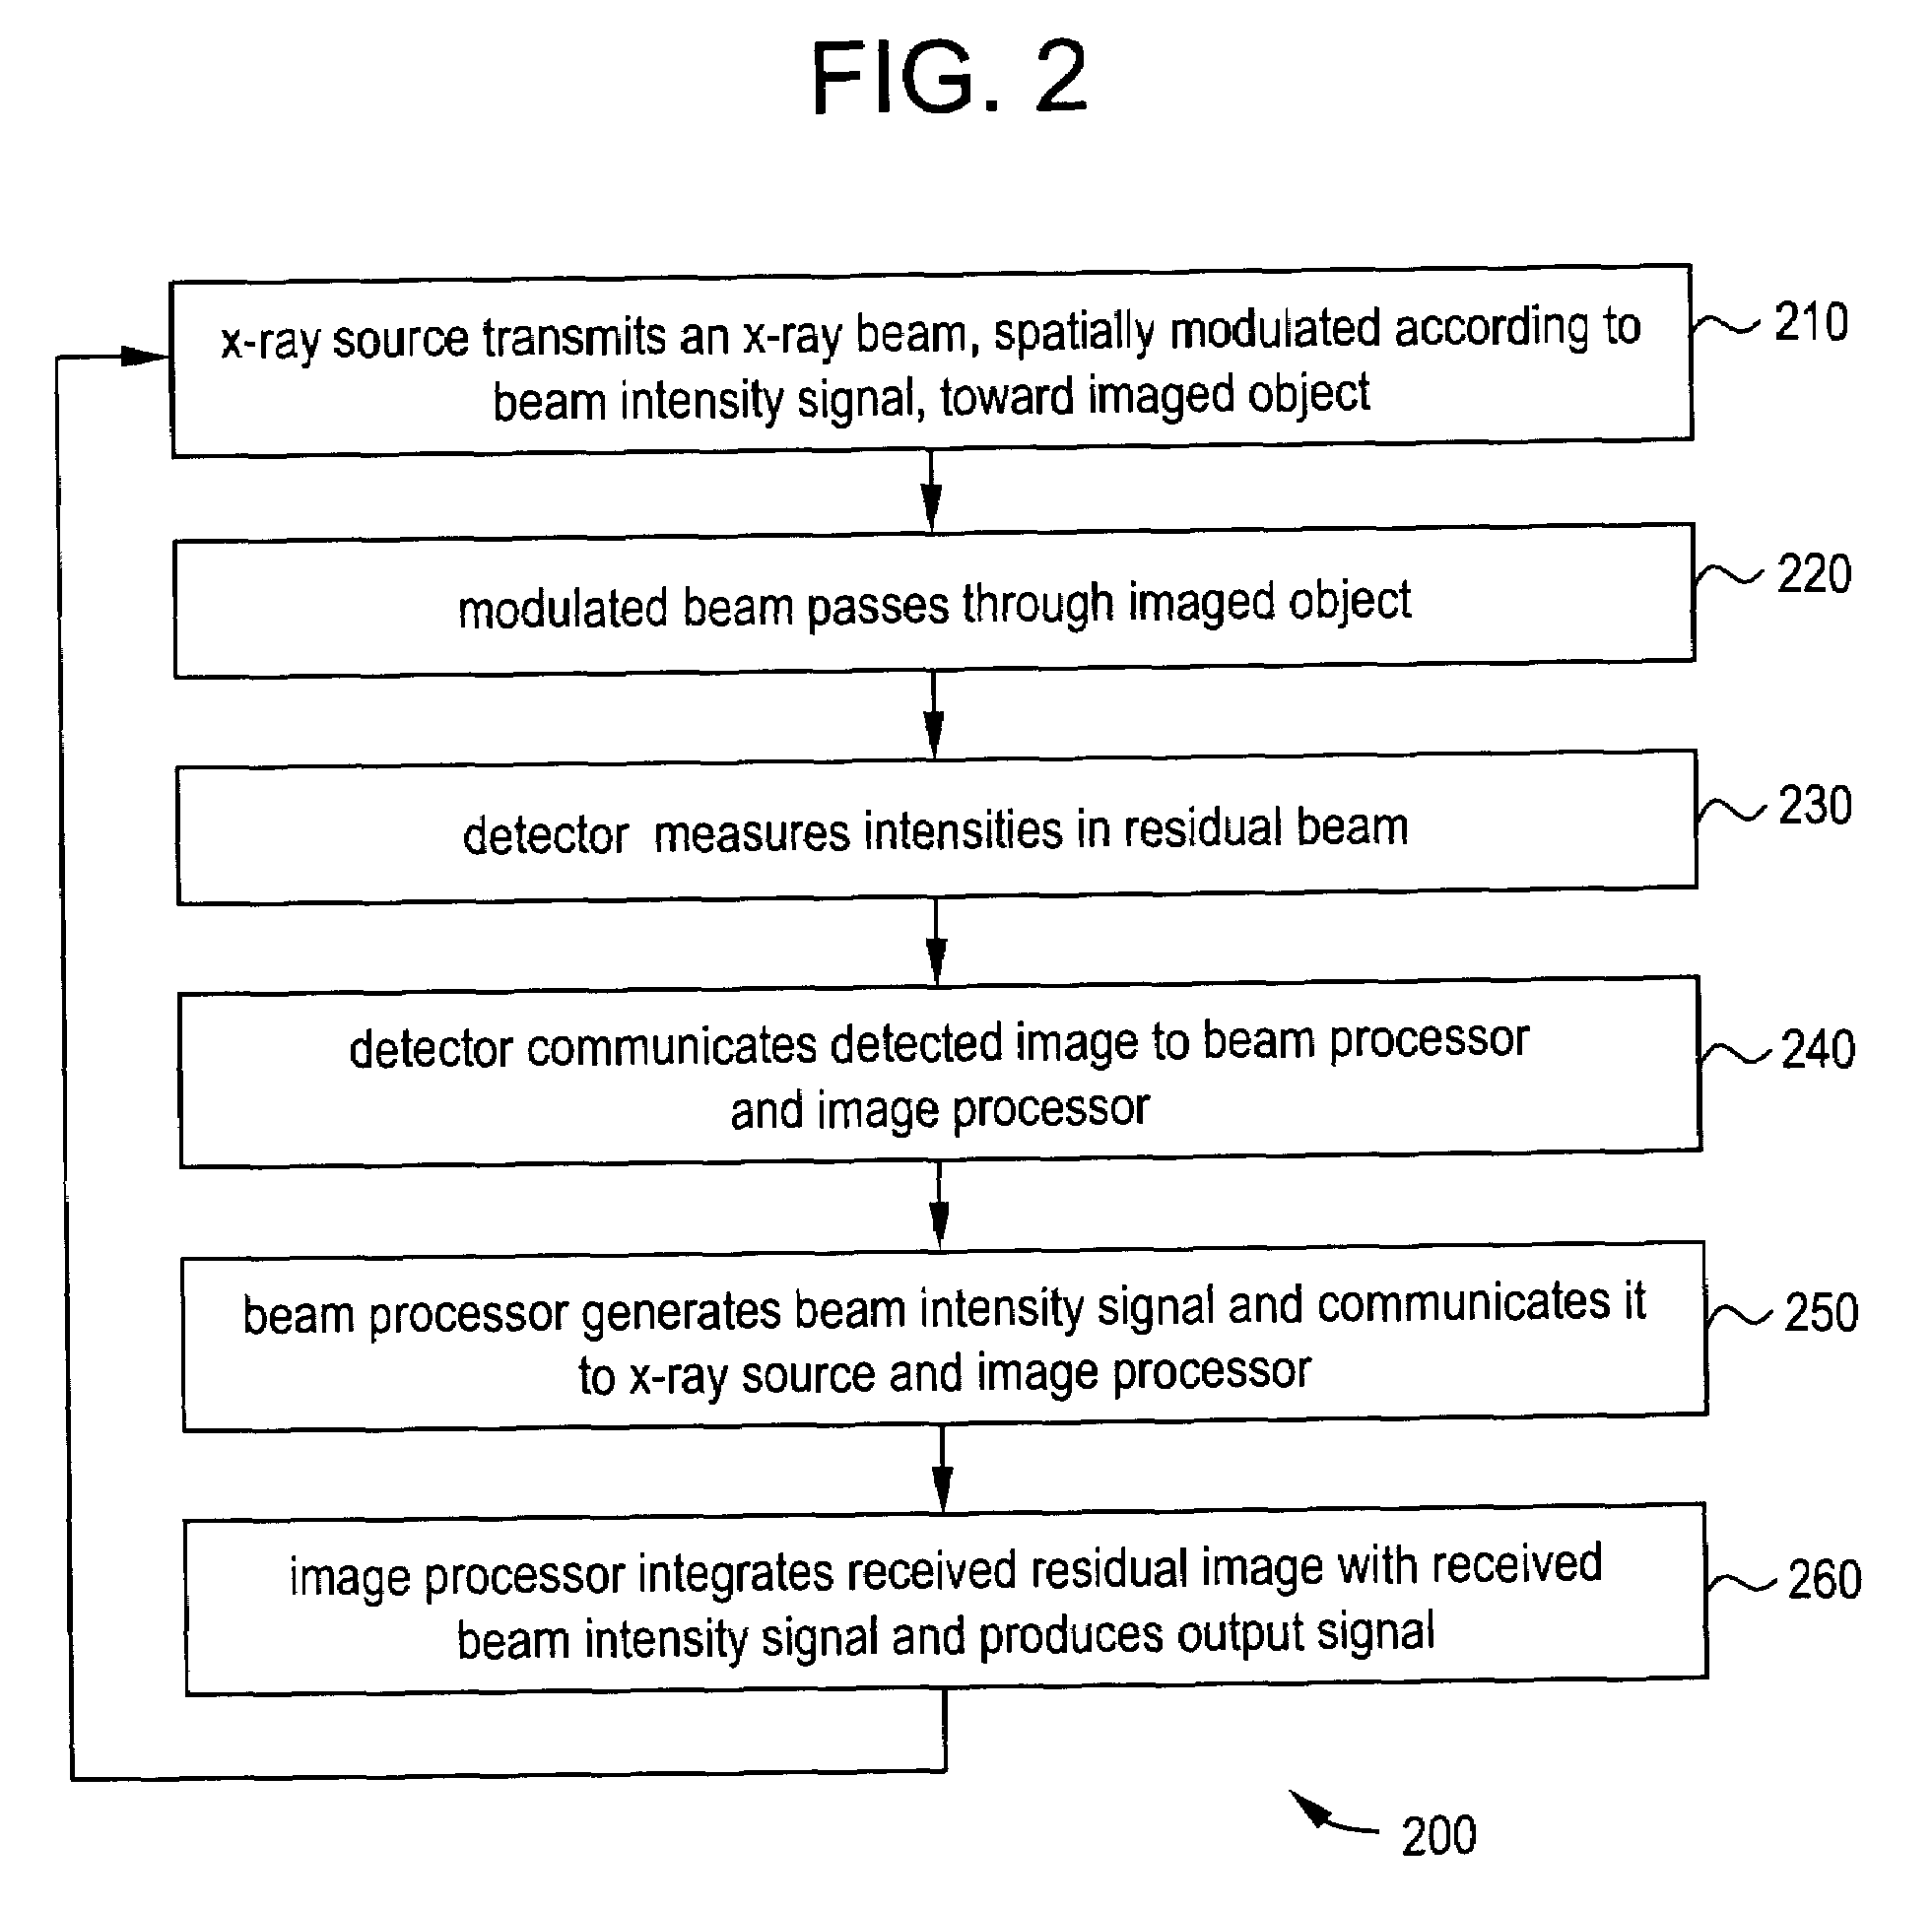 System and method for an adaptive morphology x-ray beam in an x-ray system